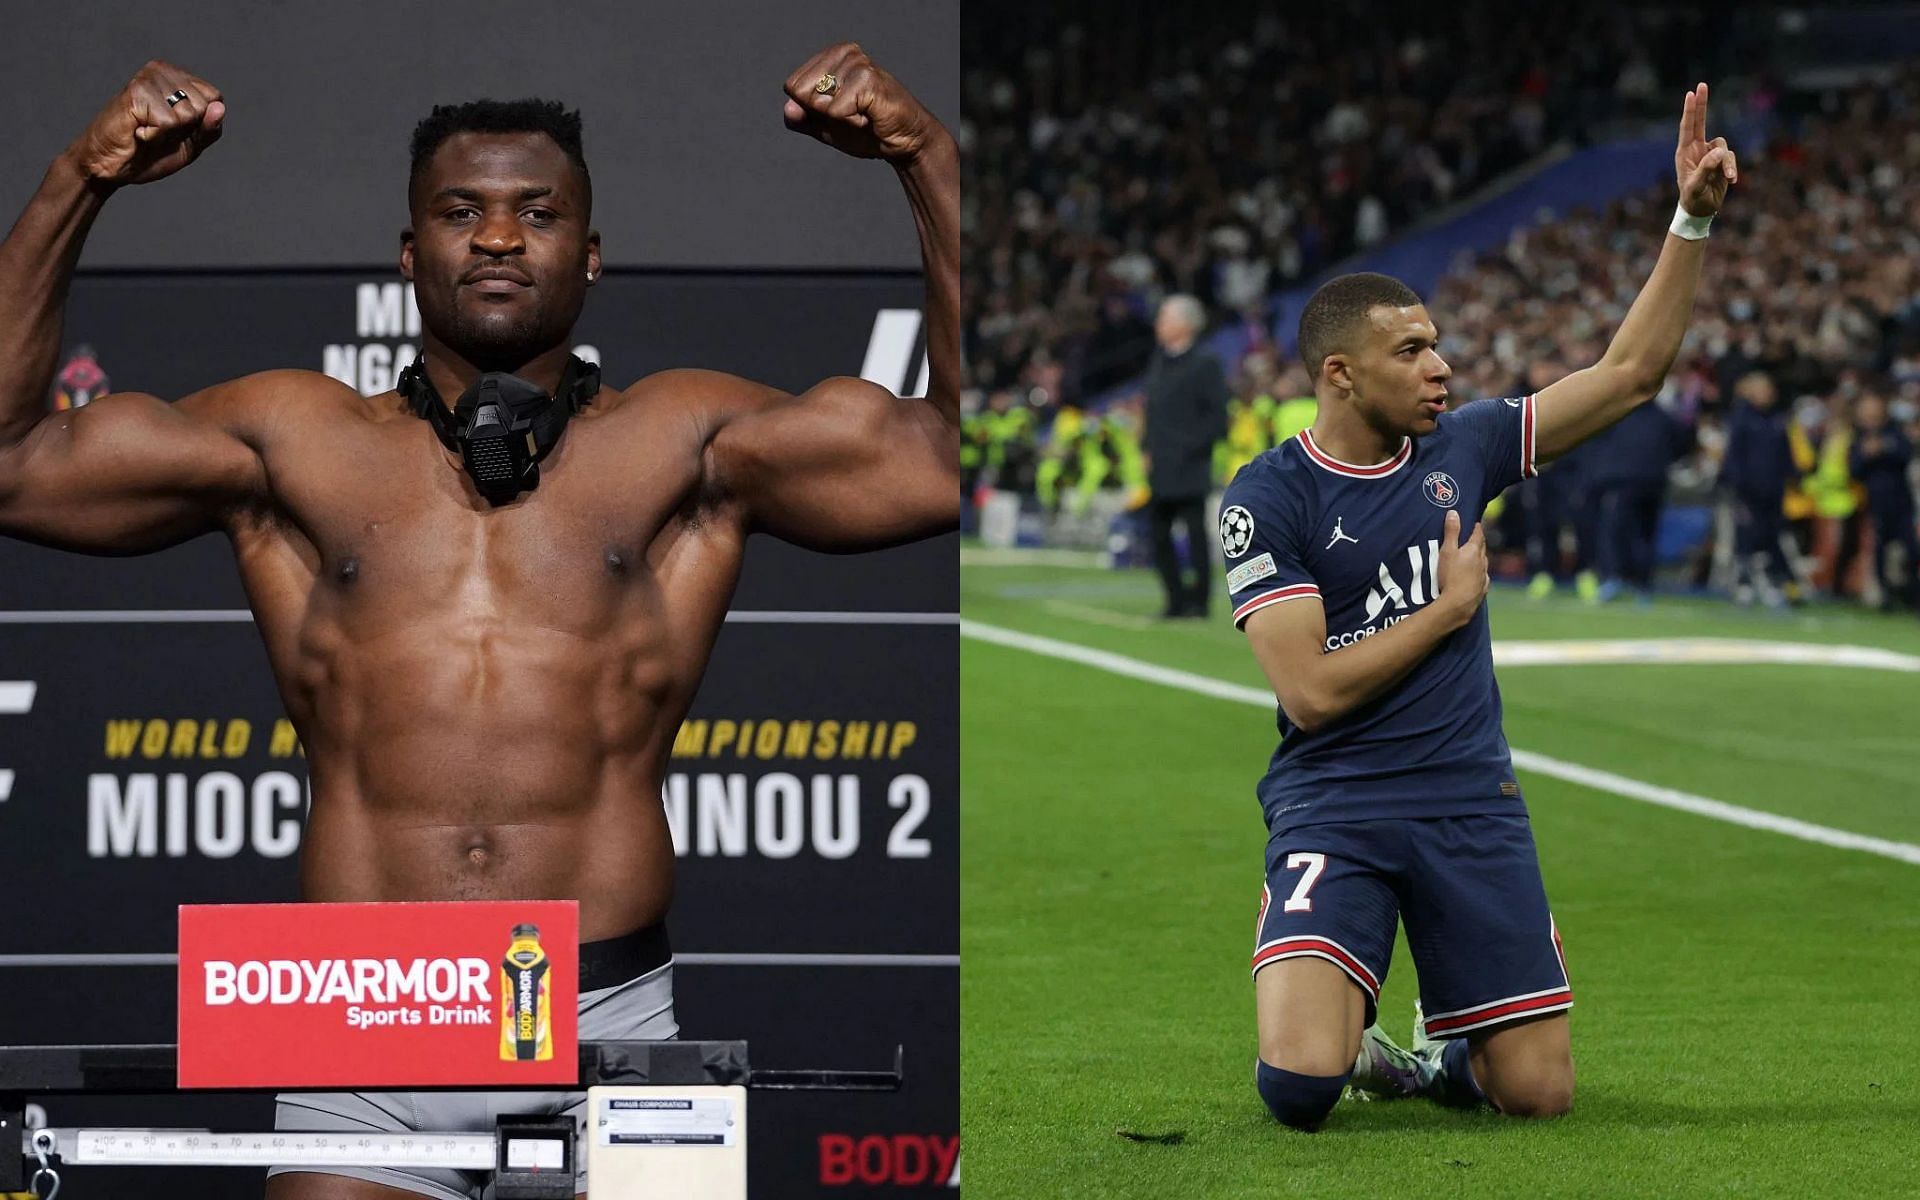 Francis Ngannou (left) and Kylian Mbappe (right) [Images courtesy of Getty]